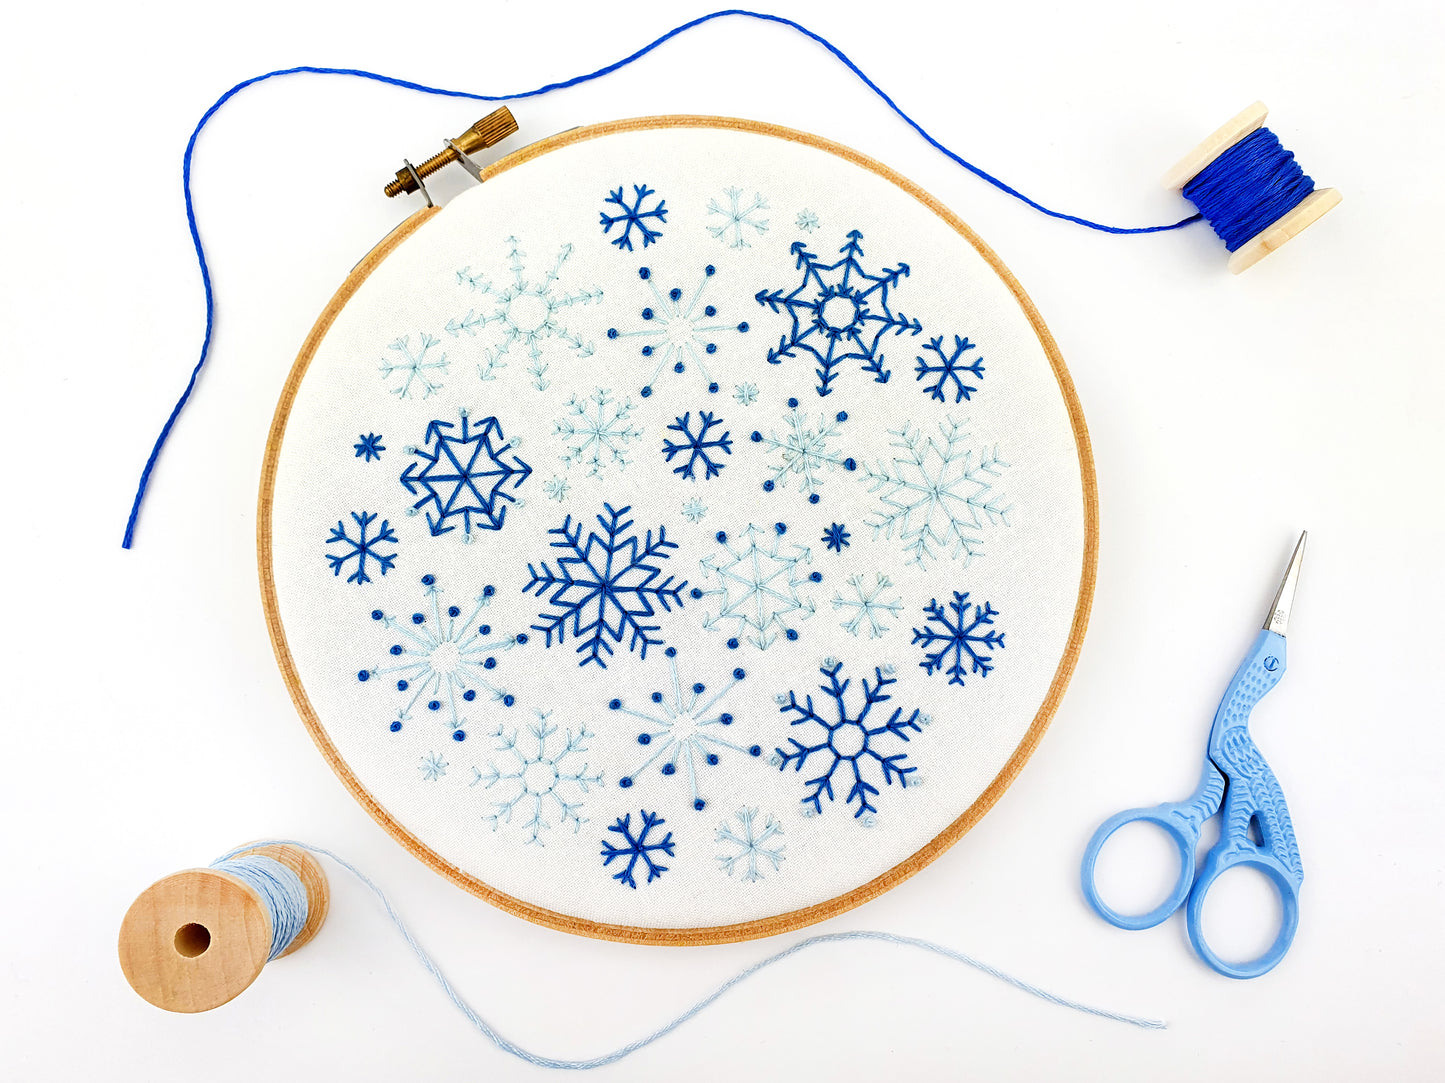 Snowflakes Embroidery Kit, Christmas Craft Kit - Embroidery Kits - ohsewbootiful